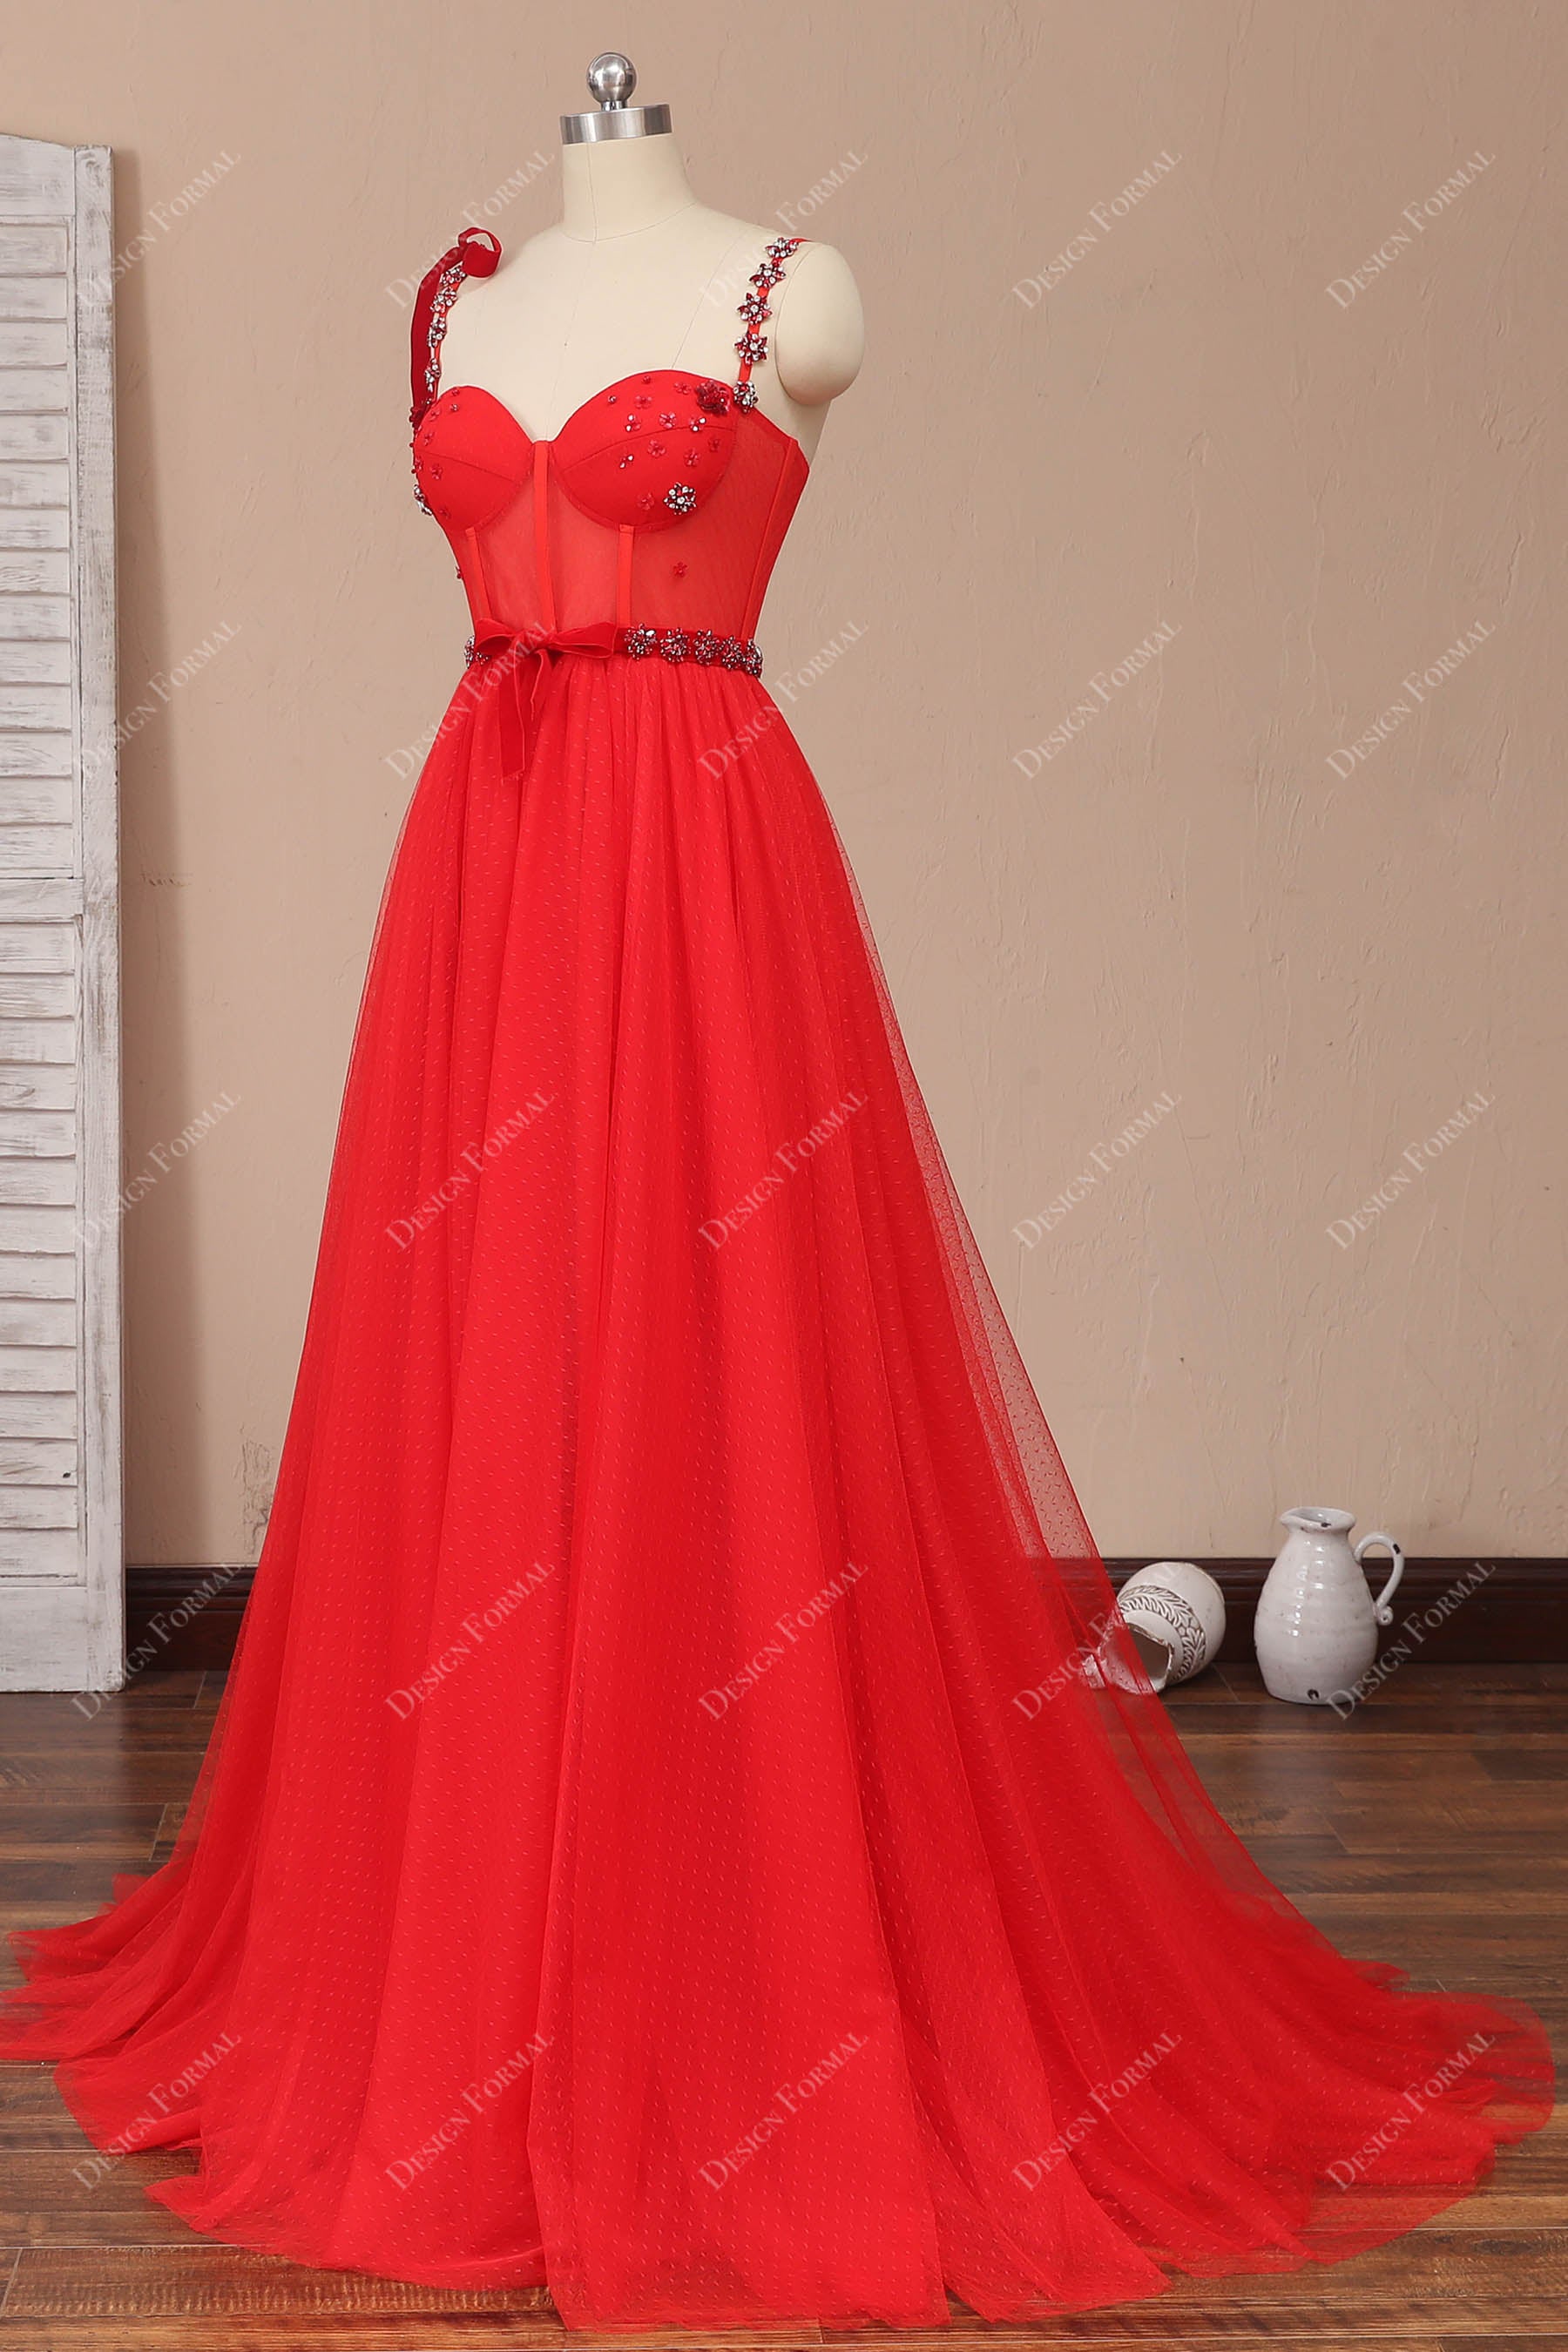 Sheer Corset Red Prom Dress